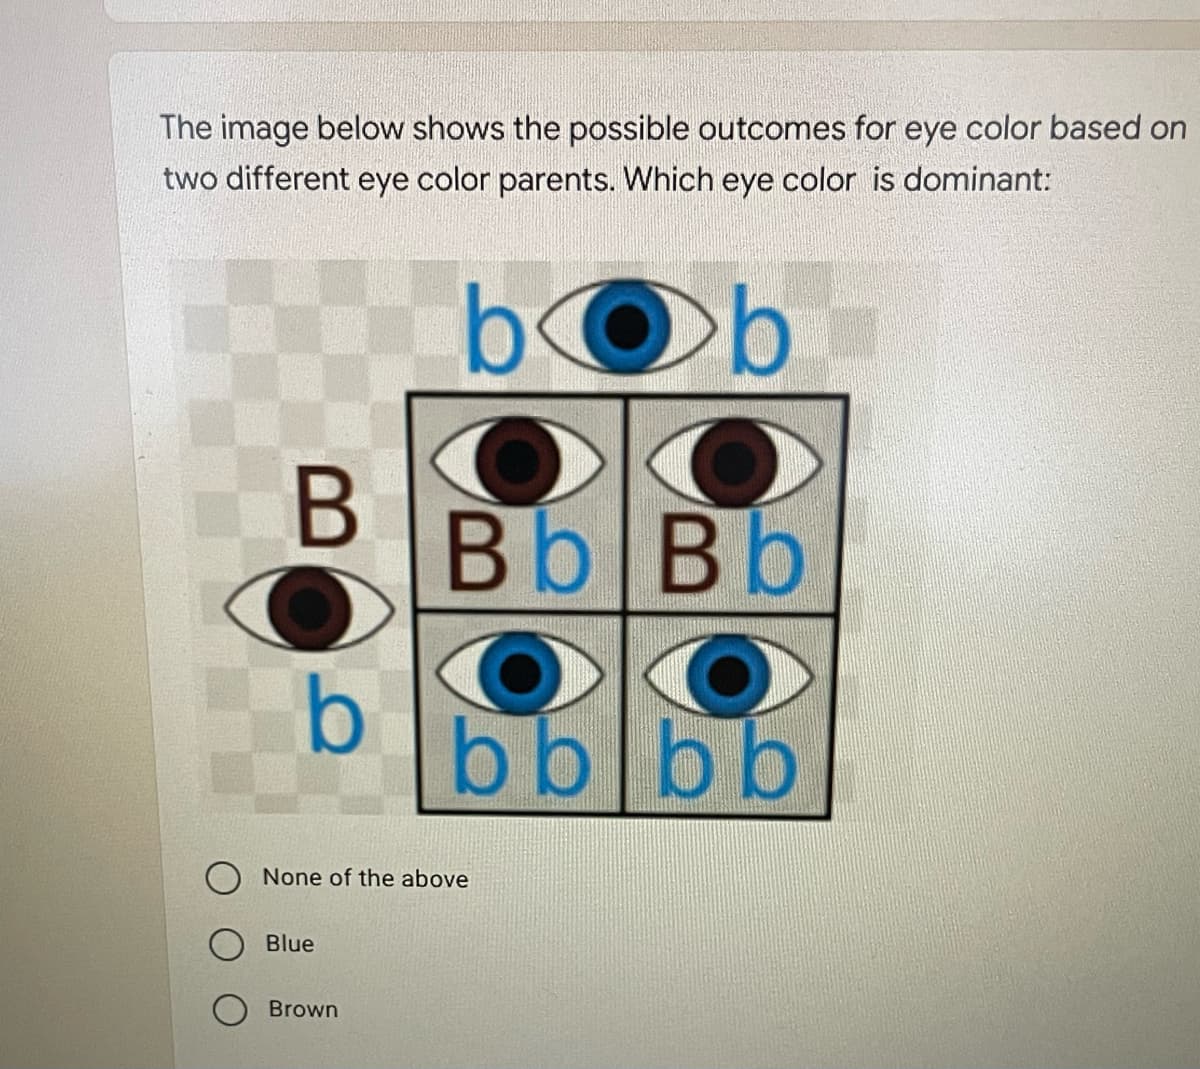 The image below shows the possible outcomes for eye color based on
two different eye color parents. Which eye color is dominant:
bOb
B
Bb Bb
b
bblbb
None of the above
Blue
Brown